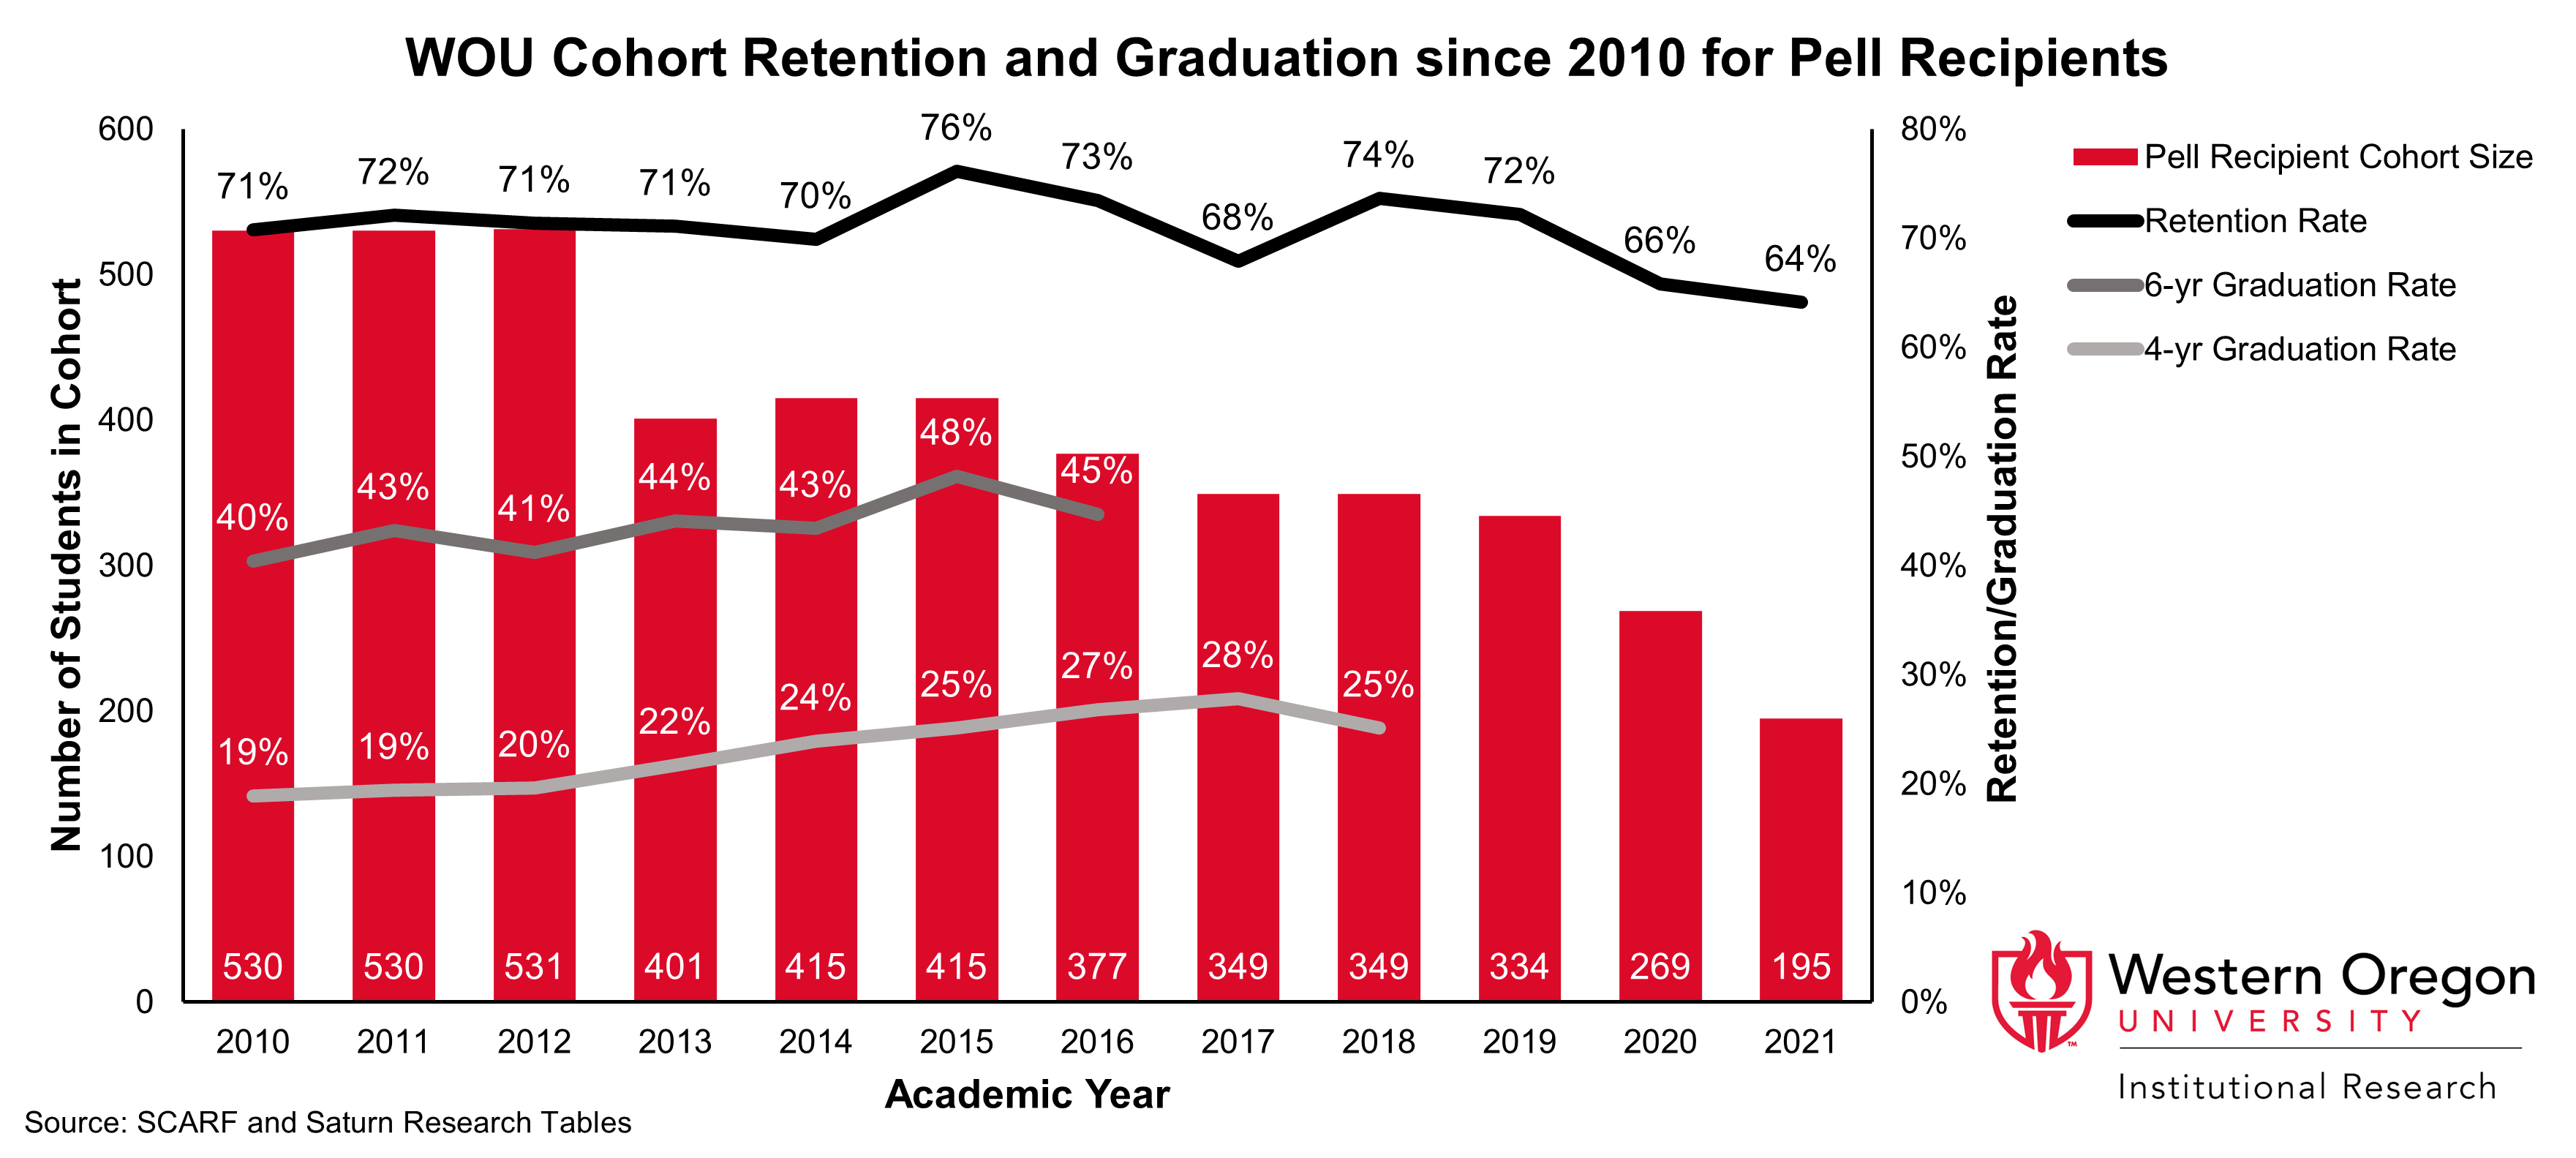 Bar and line graph of retention and 4- and 6-year graduation rates since 2010 for WOU students that are Pell recipients, showing that graduation rates have been steadily increasing while retention rates have remained largely stable